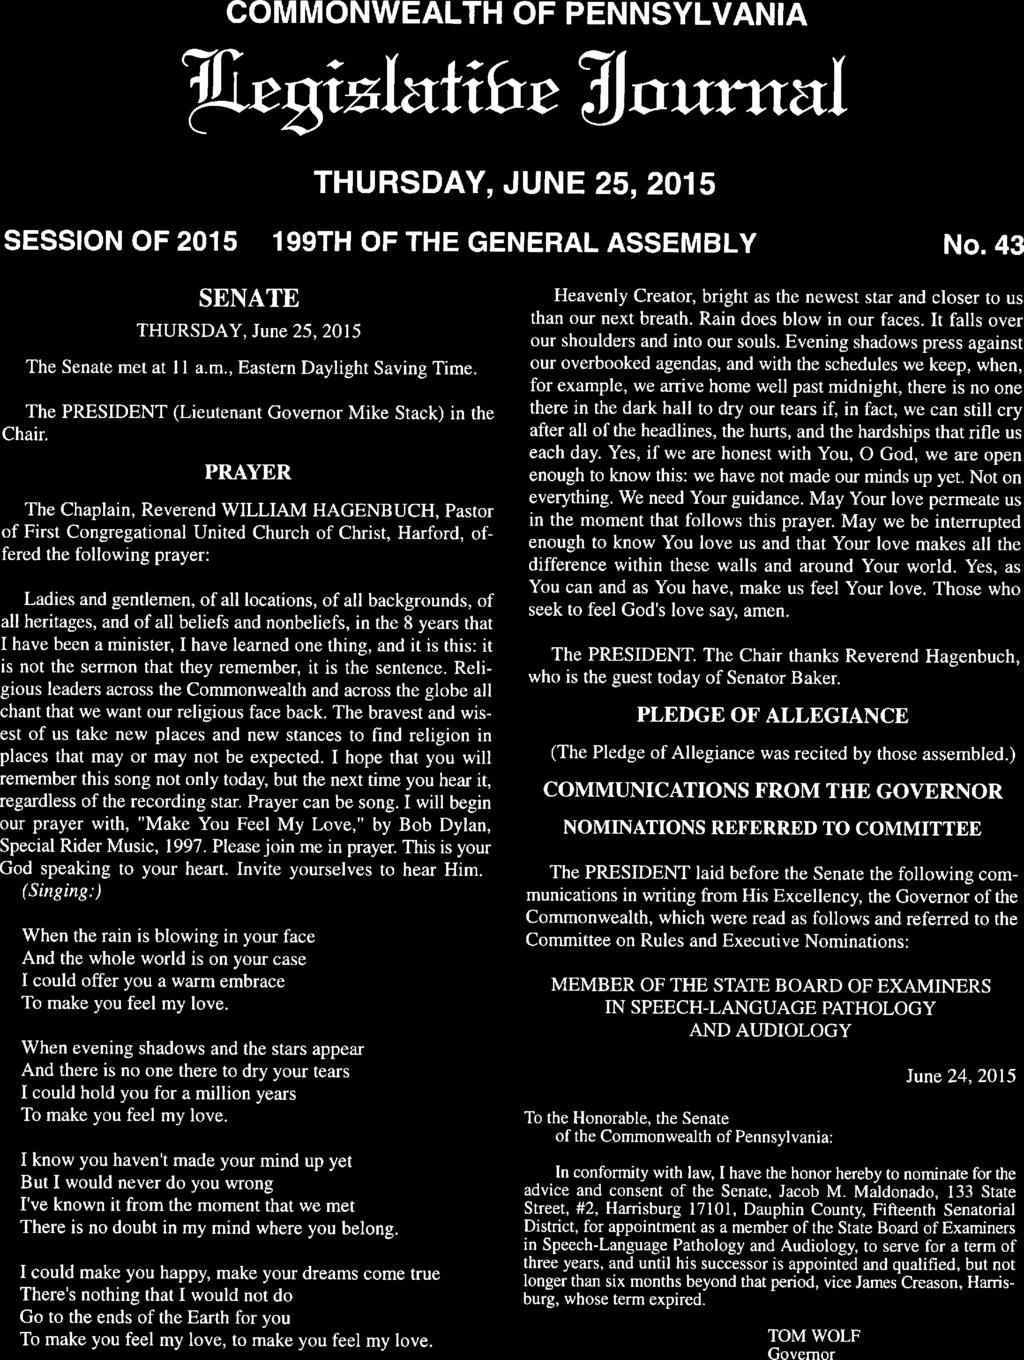 COMMONWEALTH OF PENNSYLVANIA LzIafibr juuntal THURSDAY, JUNE 25, 2015 SESSION OF 2015 199TH OF THE GENERAL ASSEMBLY No. 43 SENATE THURSDAY, June 25, 2015 The Senate met at 11 a.m., Eastern Daylight Saving Time.